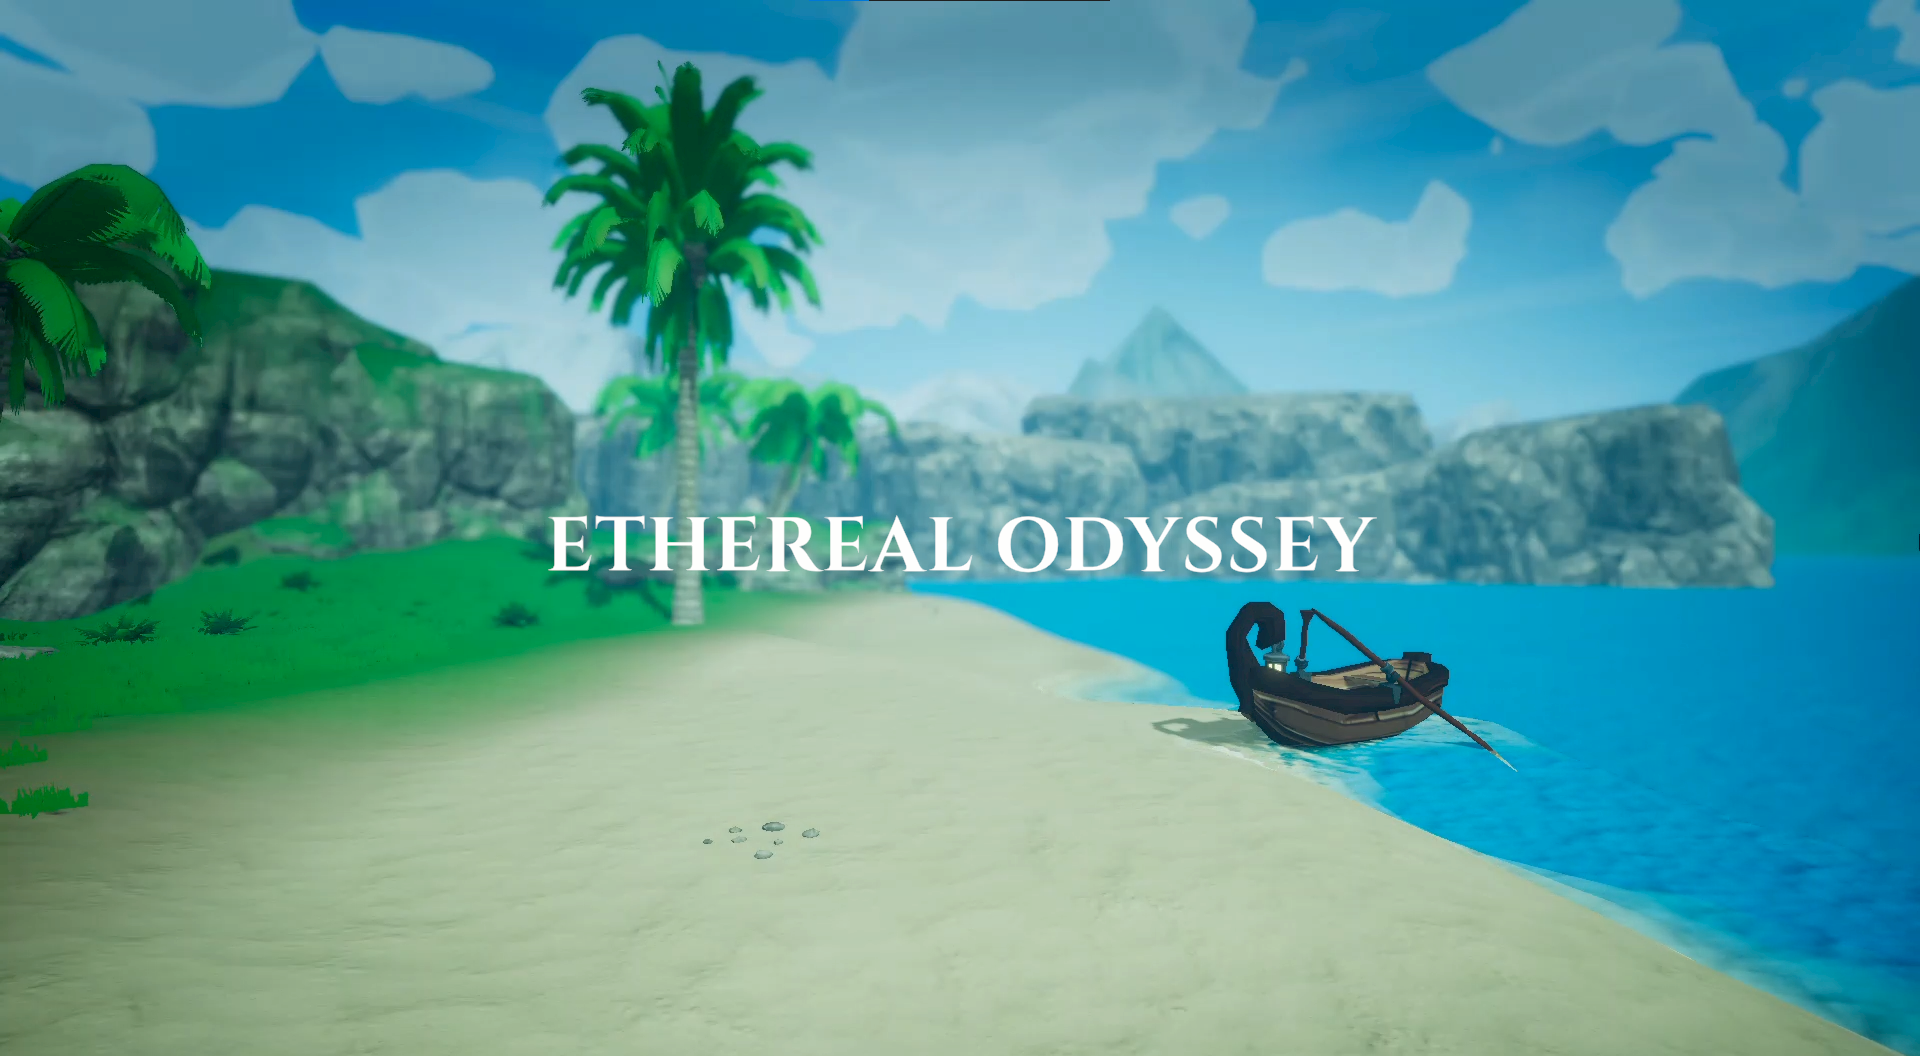 Ethereal Odyssey